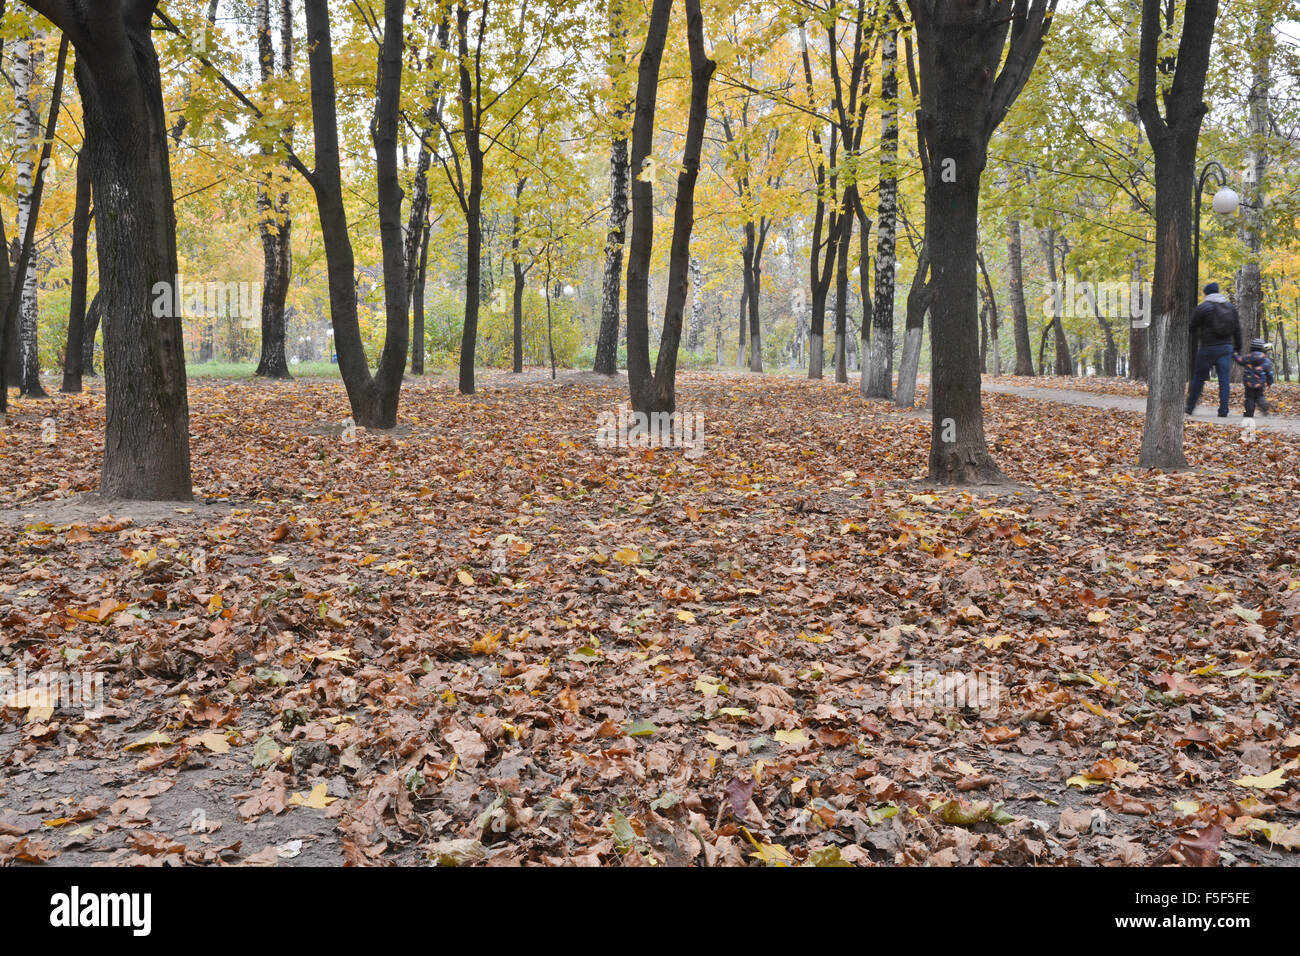 Fallen leaves in autumn Park. October in the city Park when the fall leaves. Stock Photo